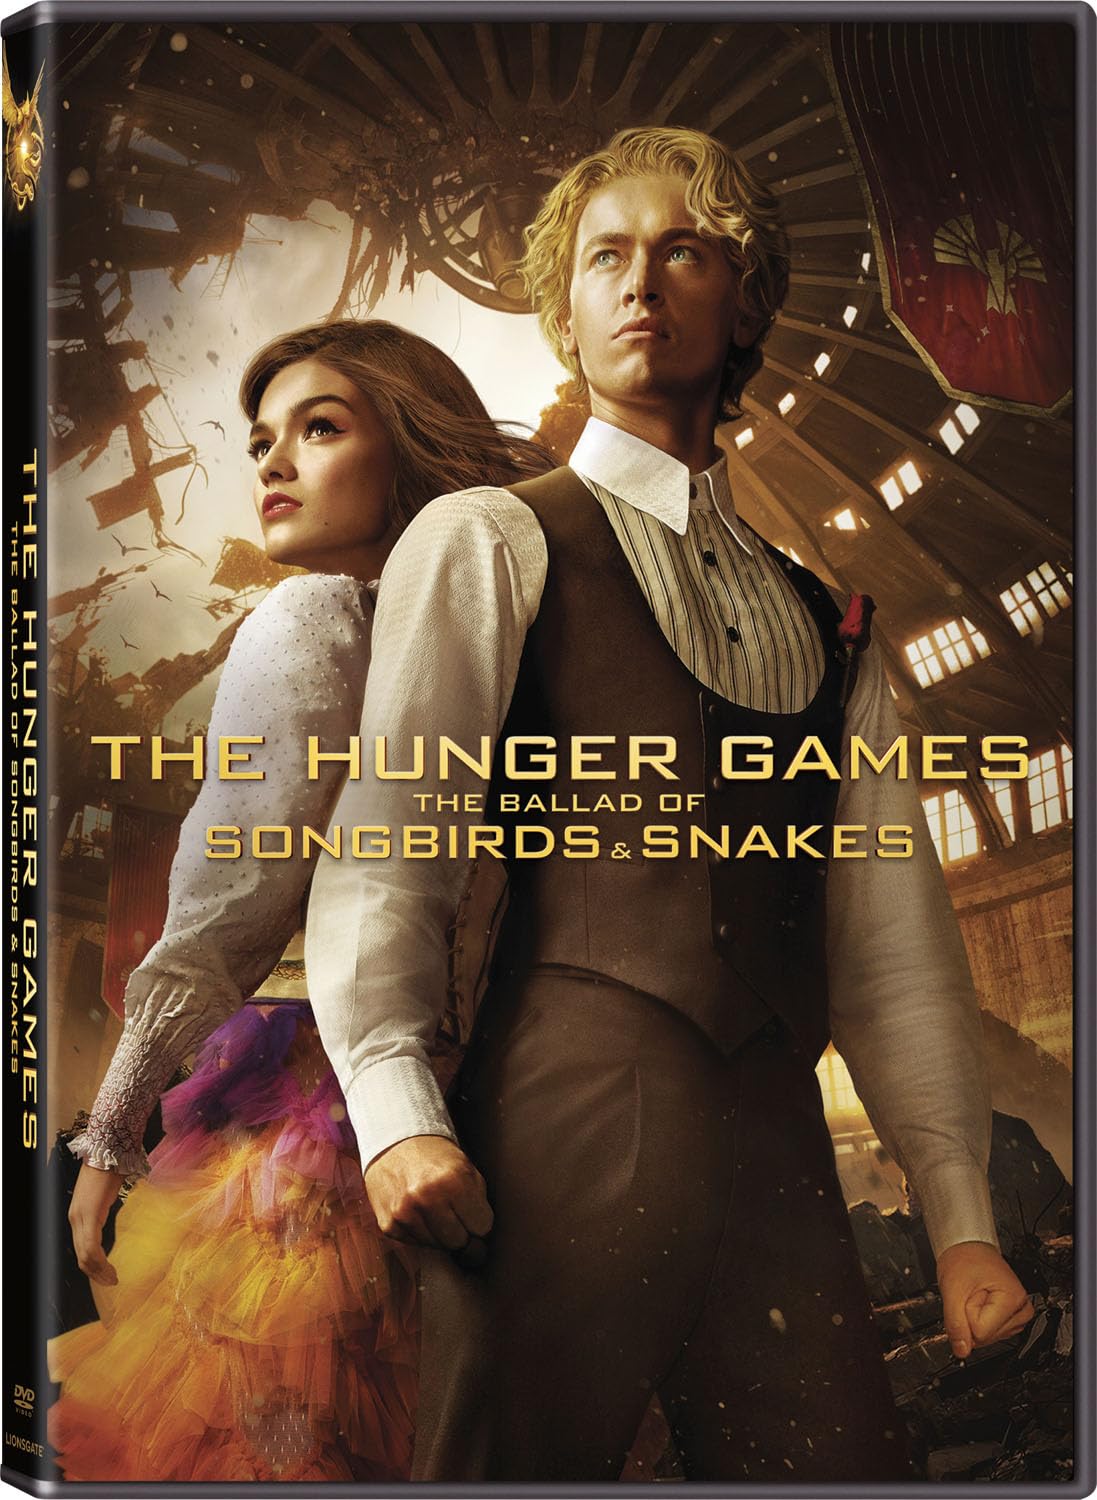 Image for "The hunger games. The ballad of songbirds and snakes"